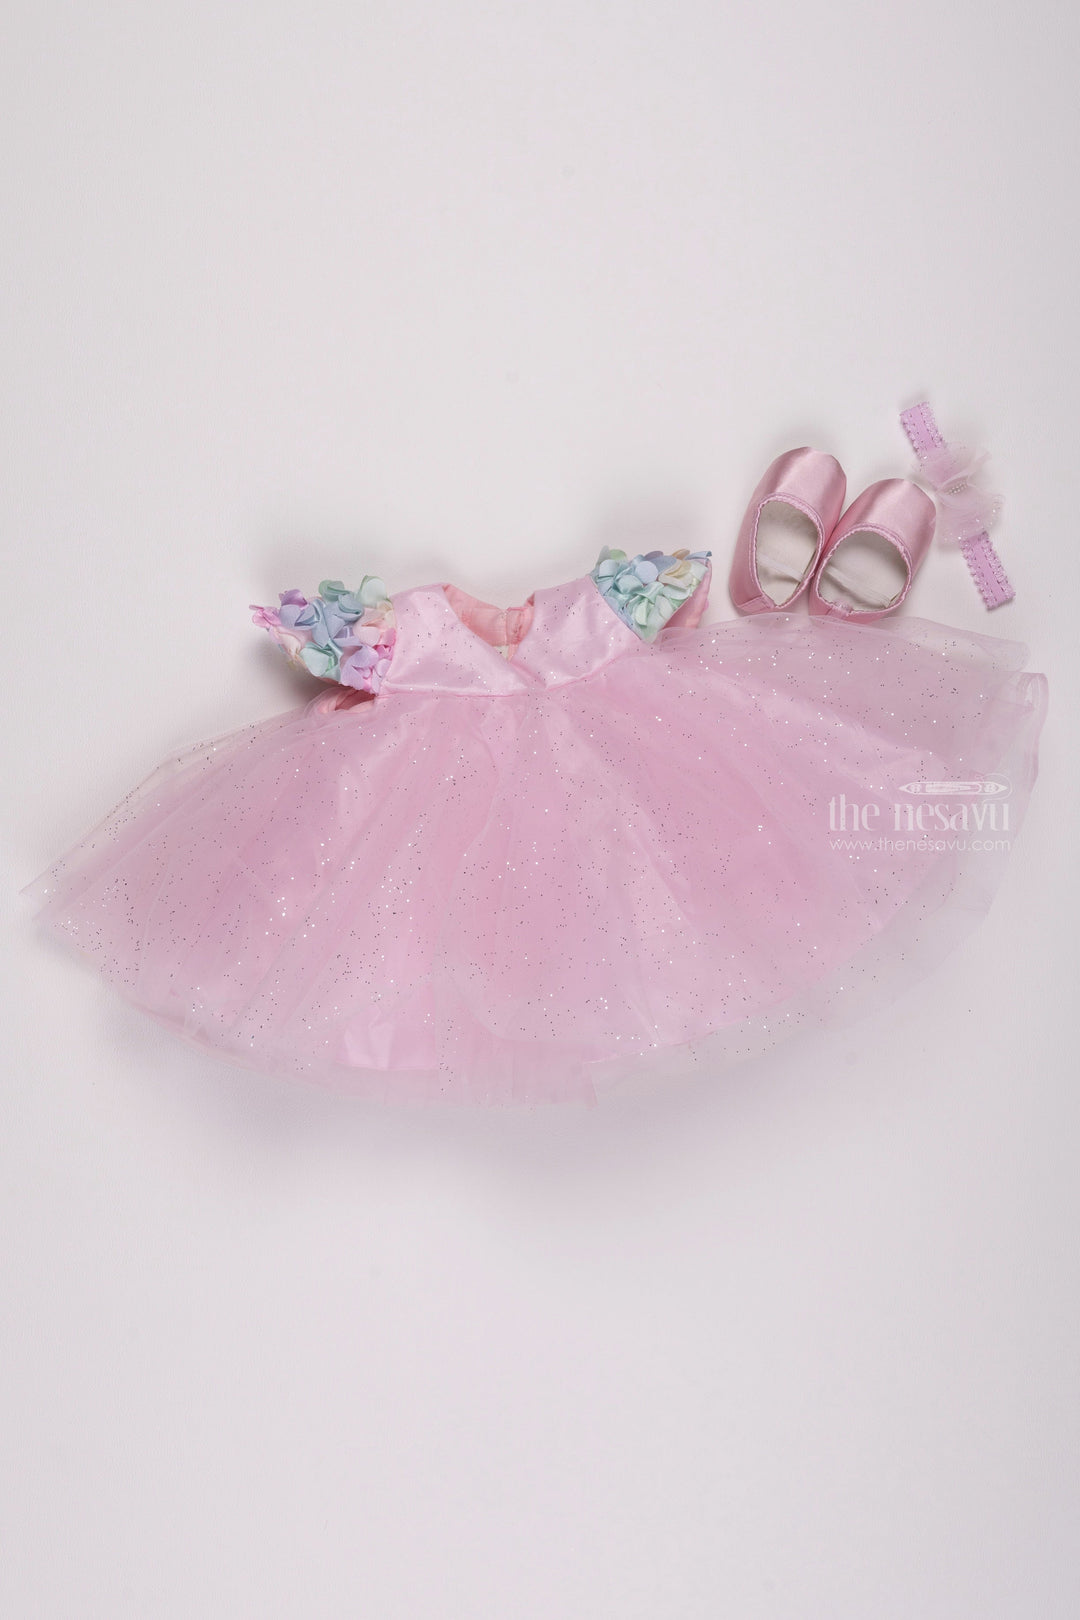 The Nesavu Girls Tutu Frock Pink Perfection: Glittering Net Frock with Delicate Floral Highlights for Girls Nesavu 12 (3M) / Pink / Plain Net PF141B-12 Chic & Trendy: Discover our Baby Girl Party Wear Frocks Collection | The Nesavu